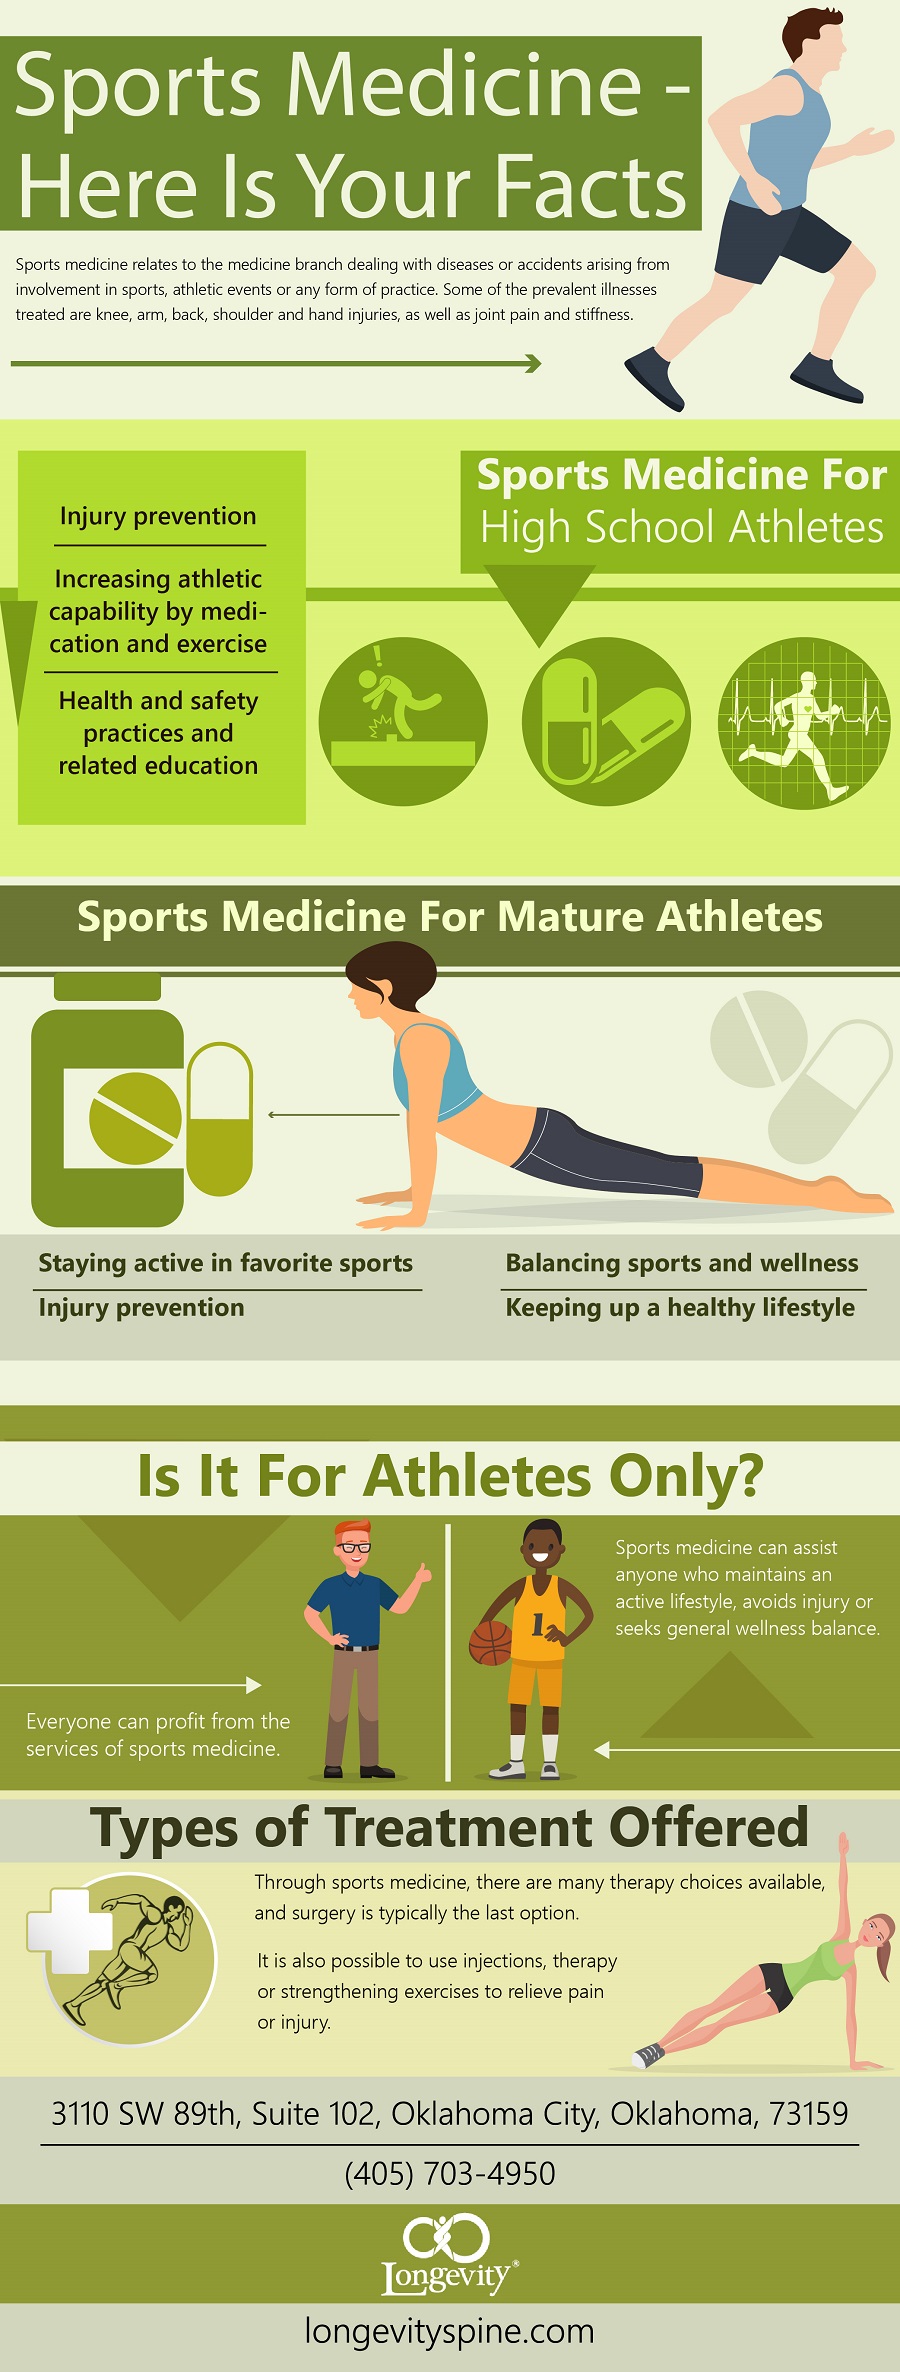 sports medicine facts infographic